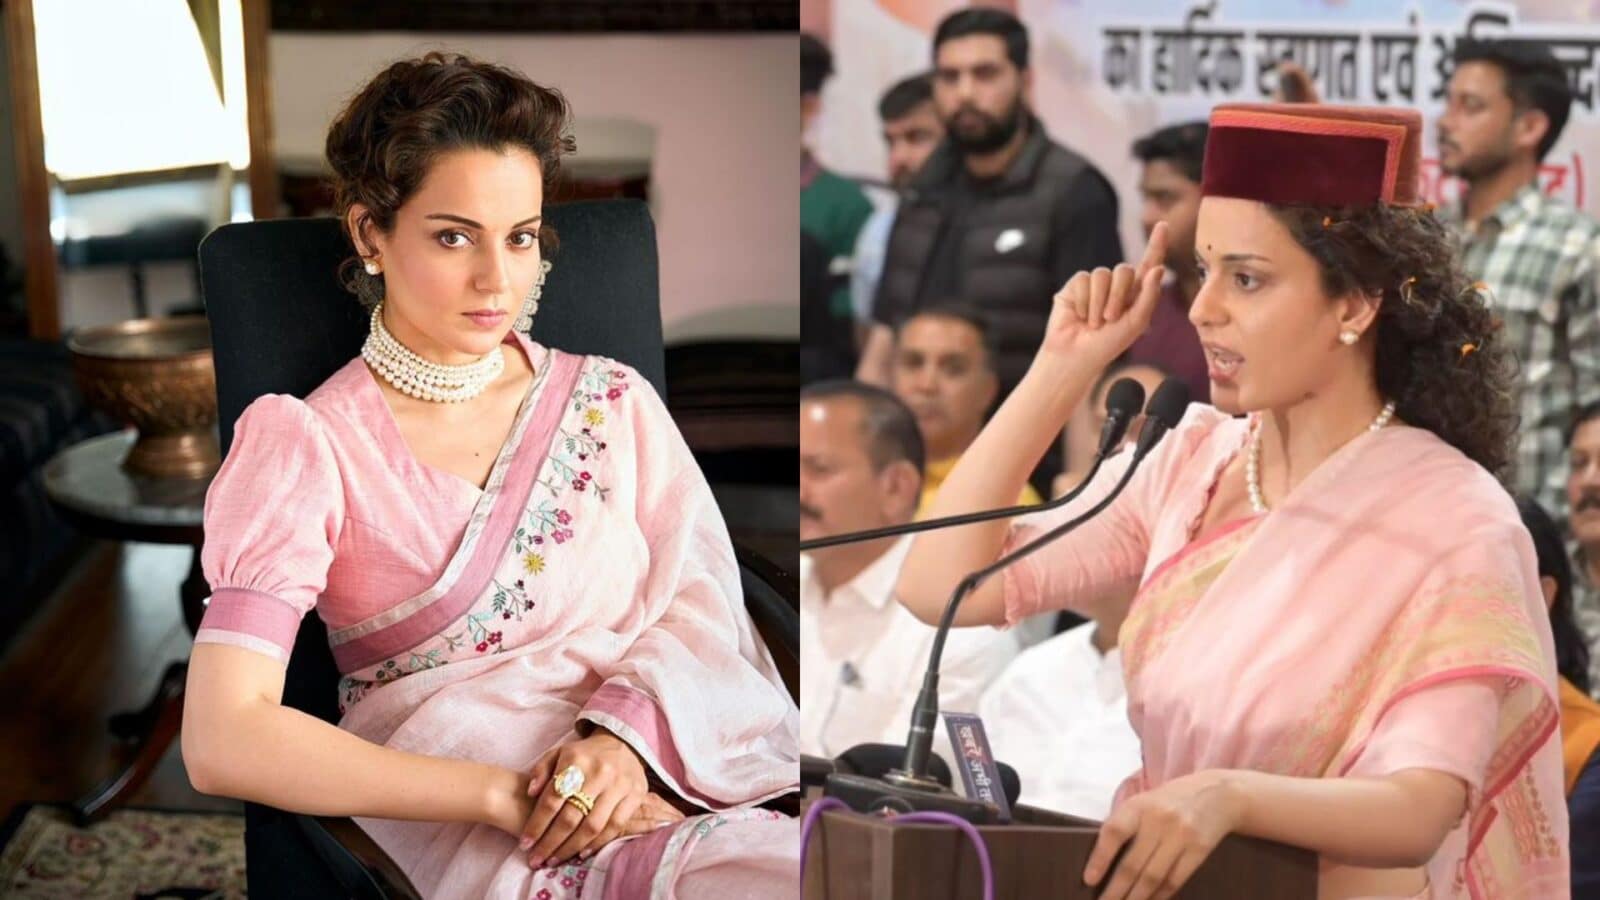 Kangana Ranaut Reacts Over Allegations Of Eating Beef